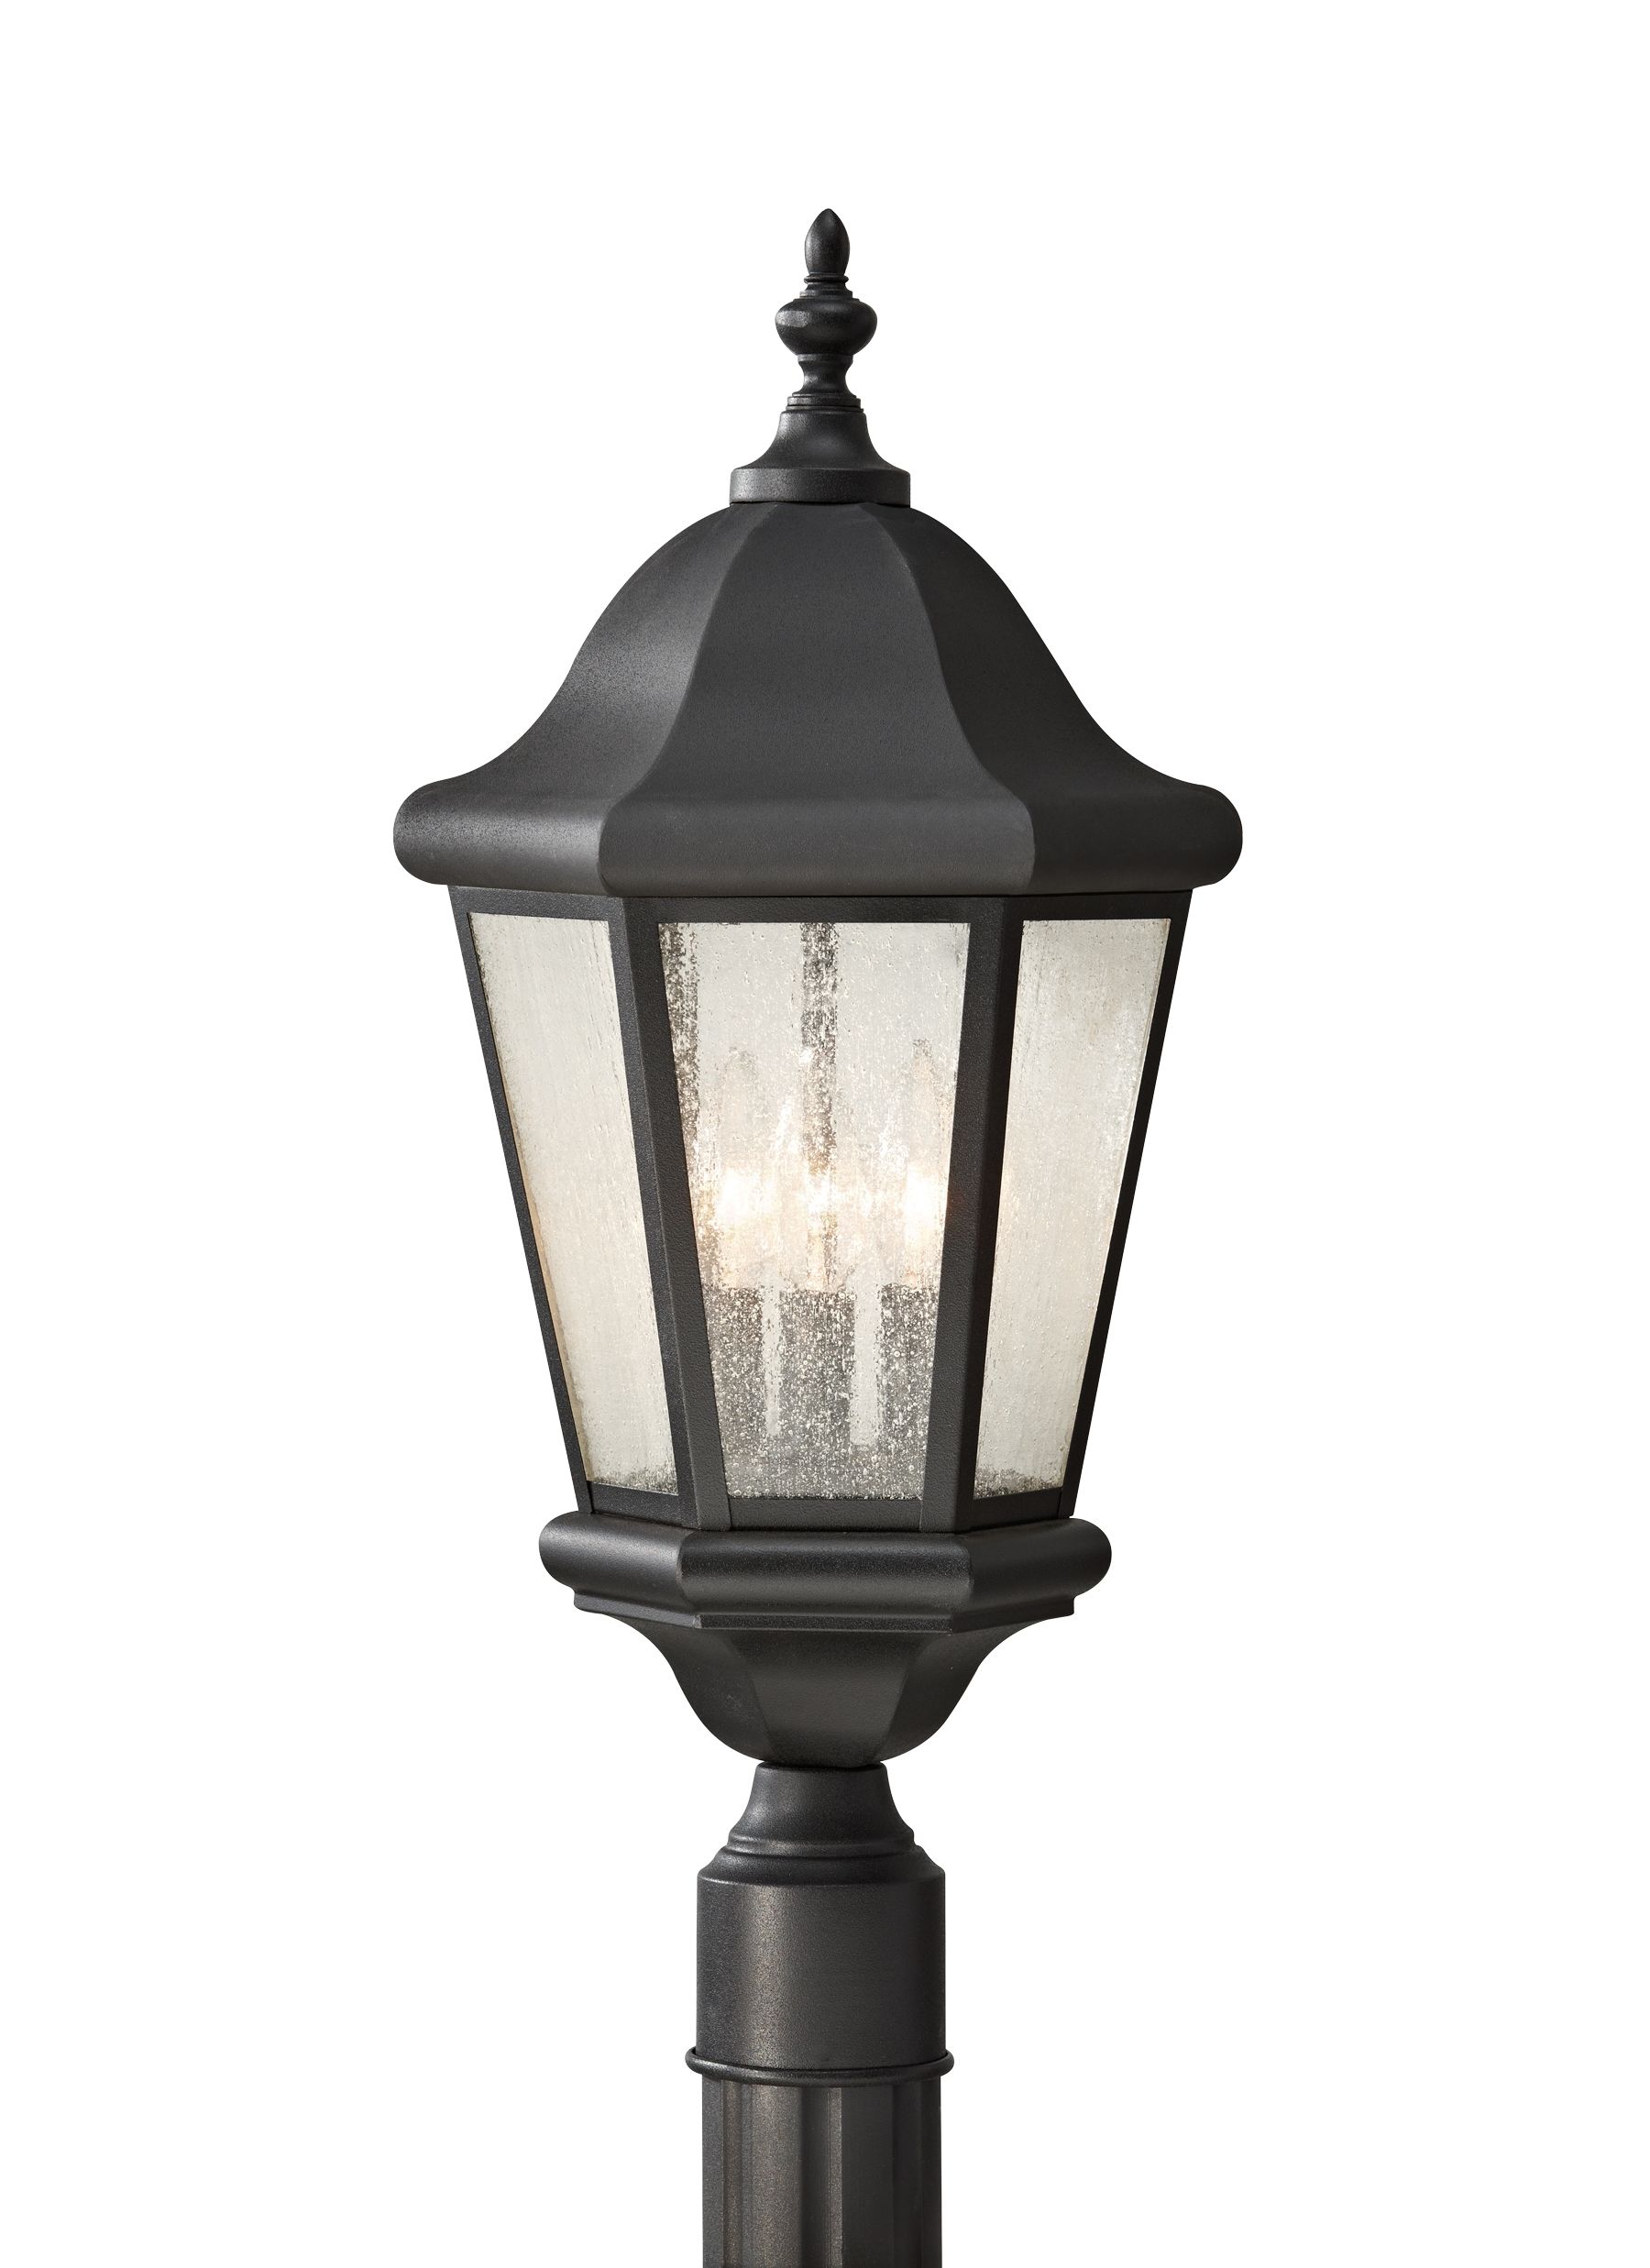 Ol5907bk,3 Light Outdoor Lantern,black Intended For Outdoor Lanterns On Stands (Photo 12 of 20)